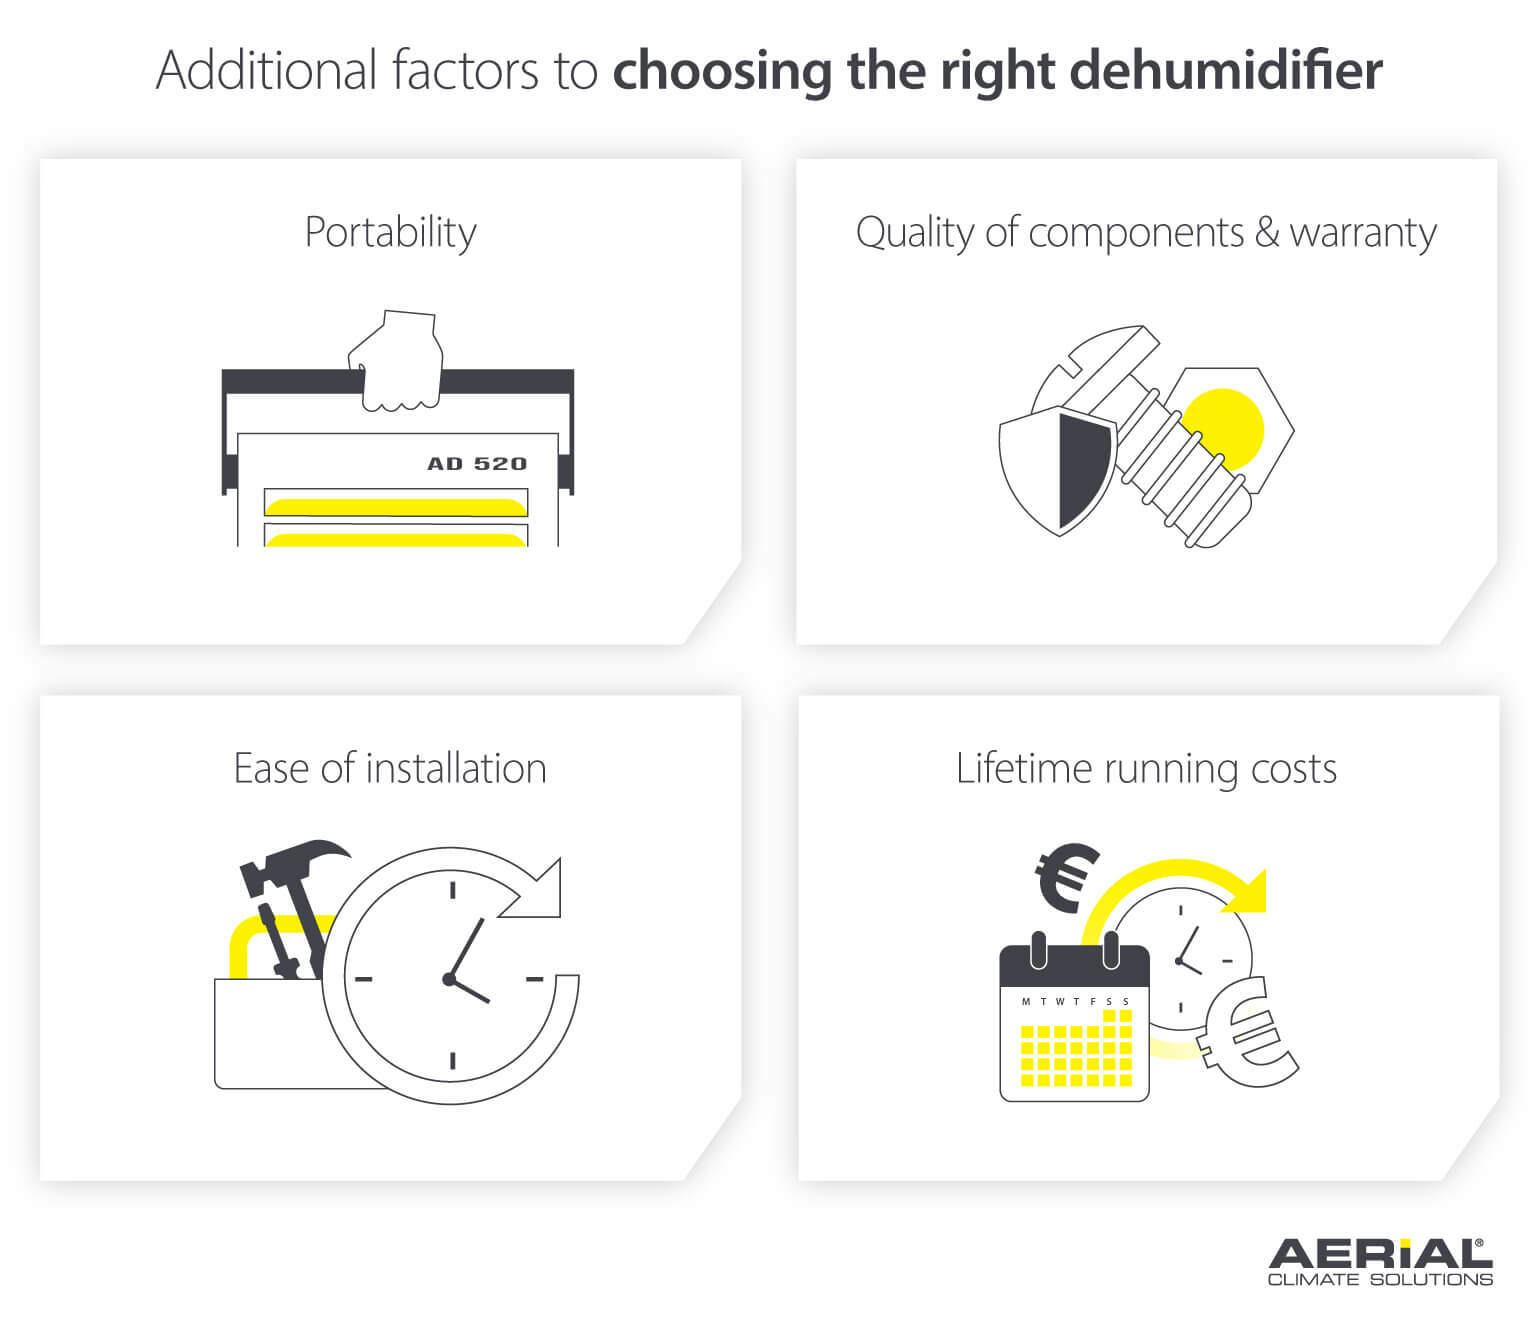 Factors for choosing the right dehumidifier - Infographic image